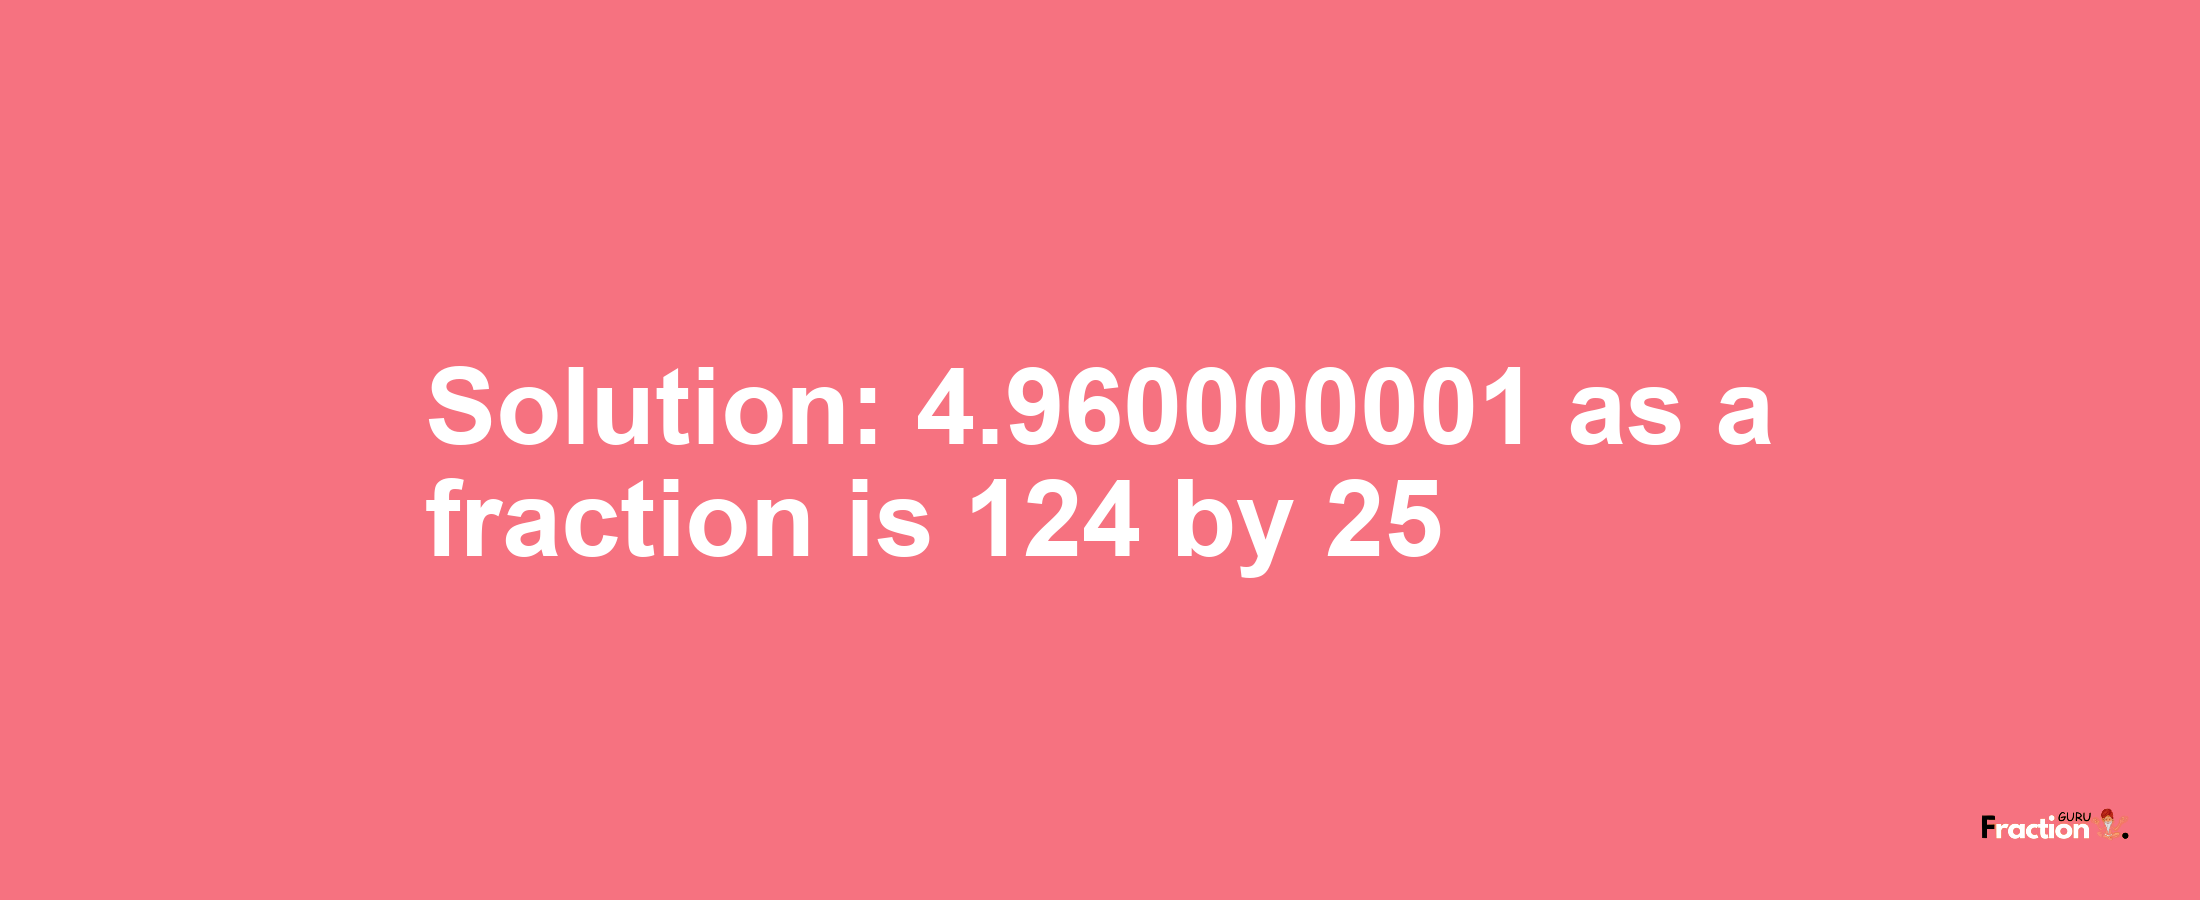 Solution:4.960000001 as a fraction is 124/25